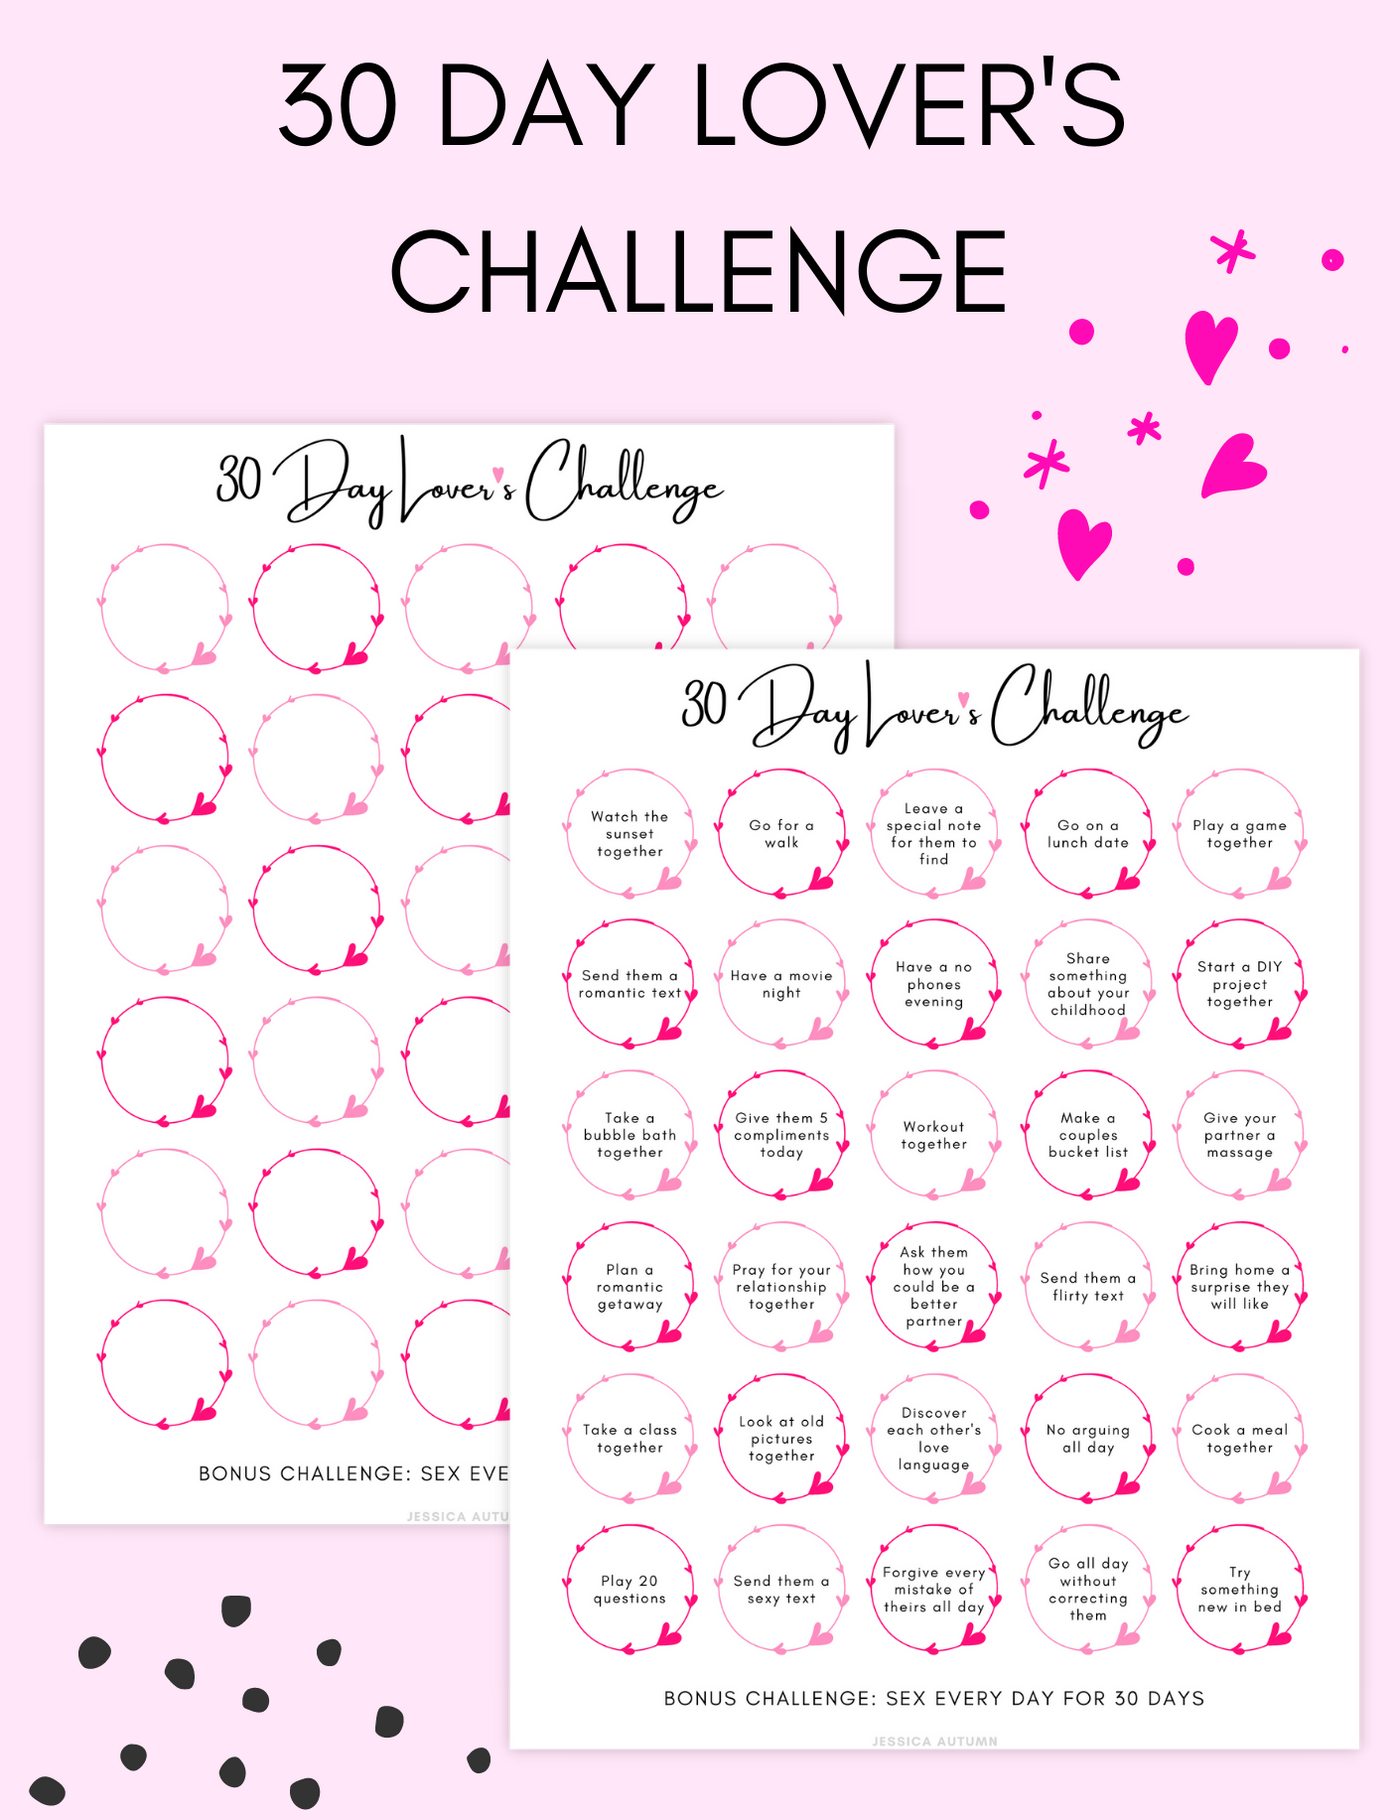 30 Day Lover's Challenge